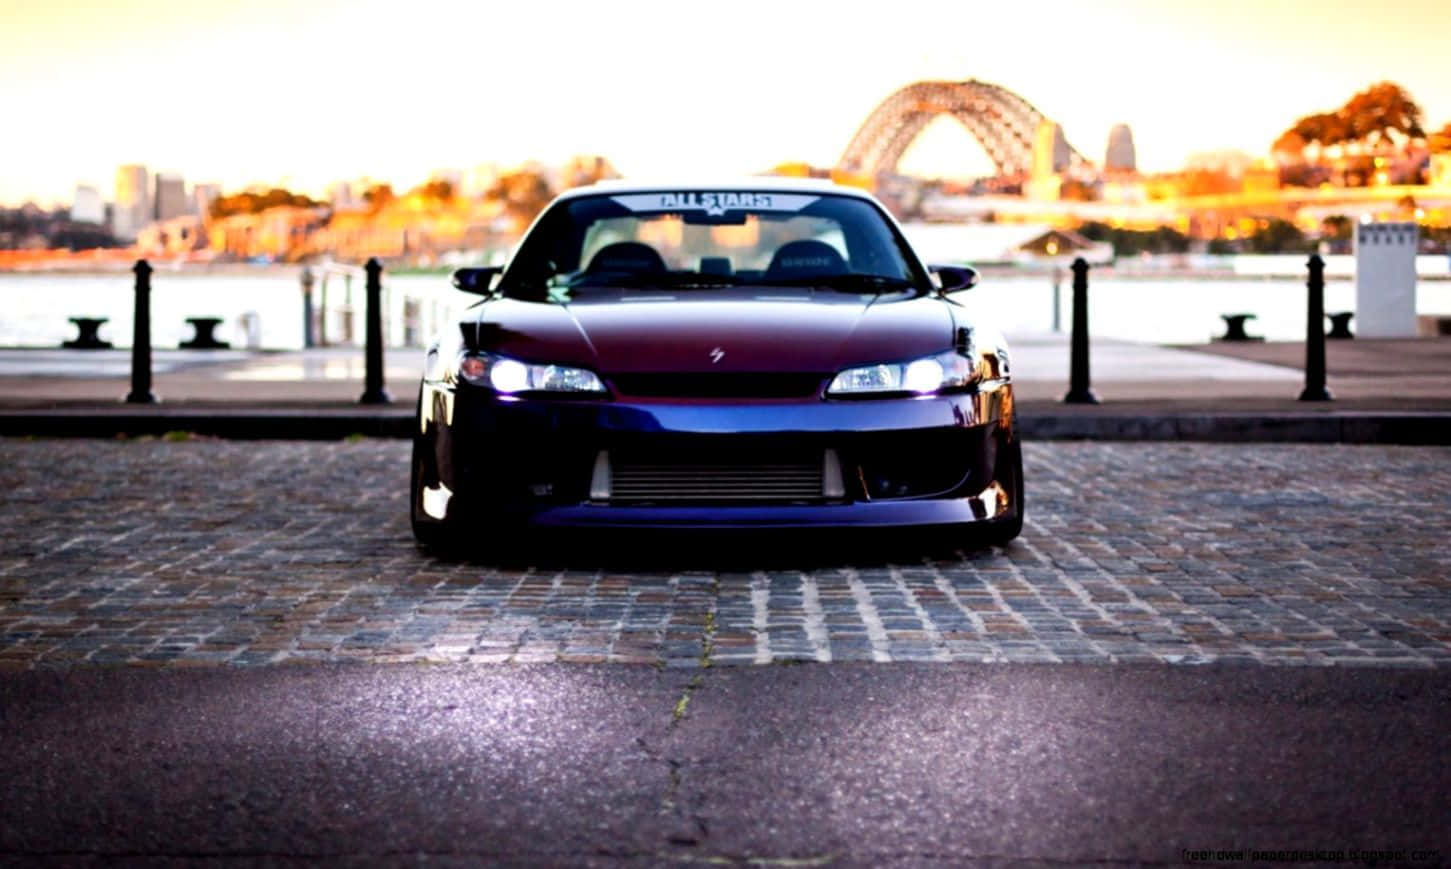 "The Impeccable Nissan Silvia S15 in Full Glory" Wallpaper